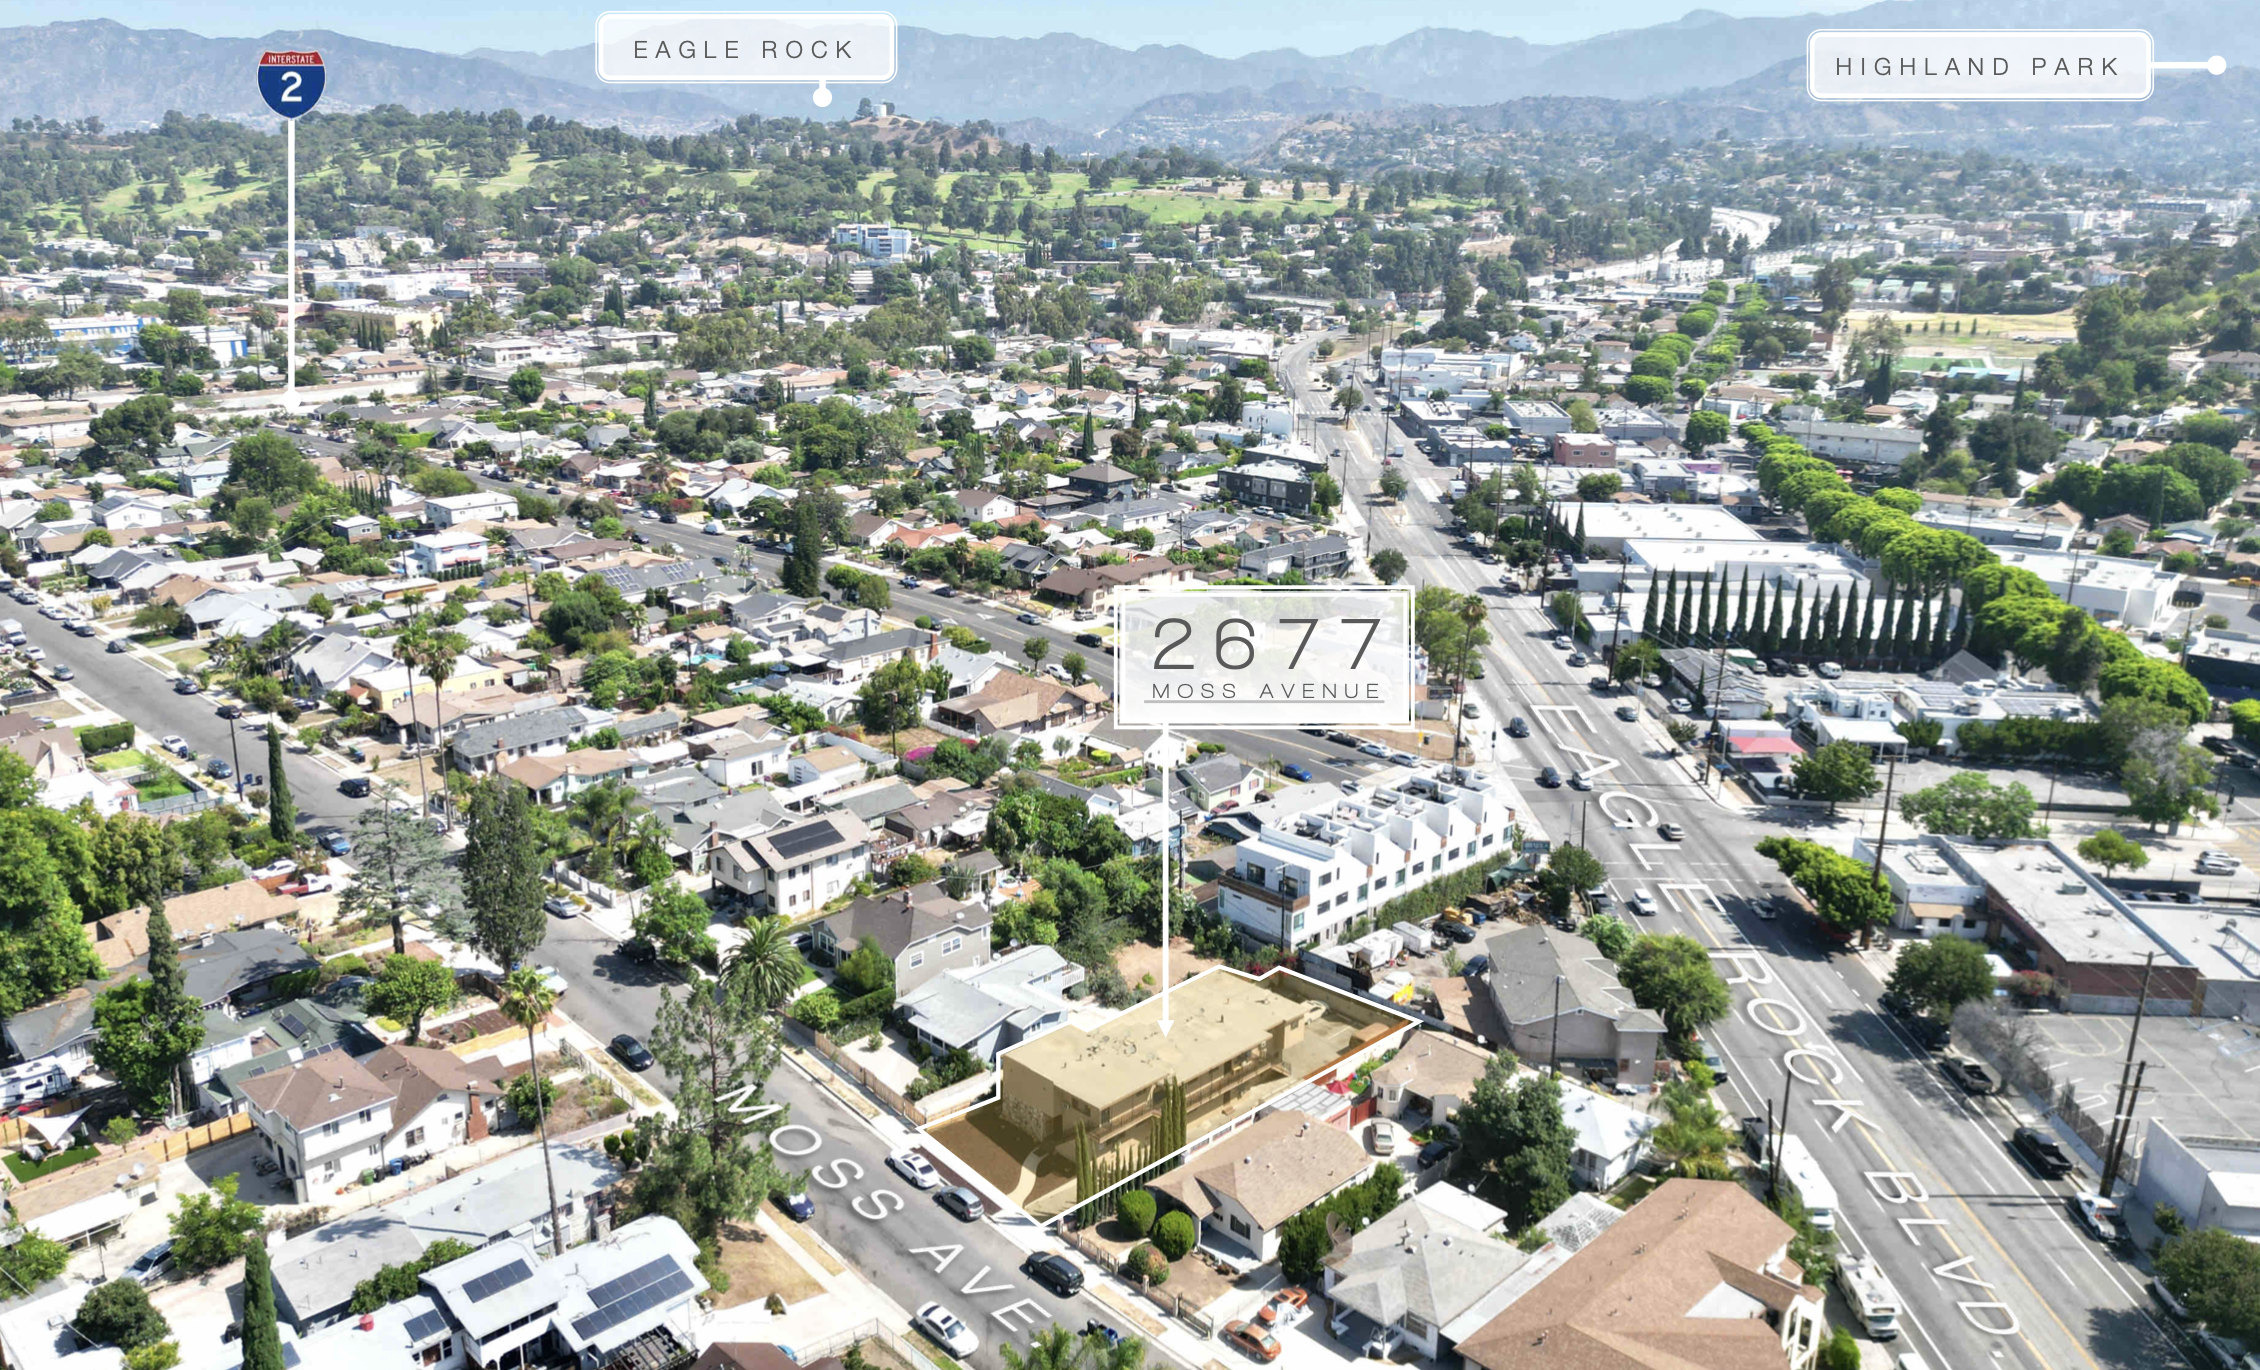 Aerial view of 2677 Moss Avenue between Eagle Rock and Highland Park.